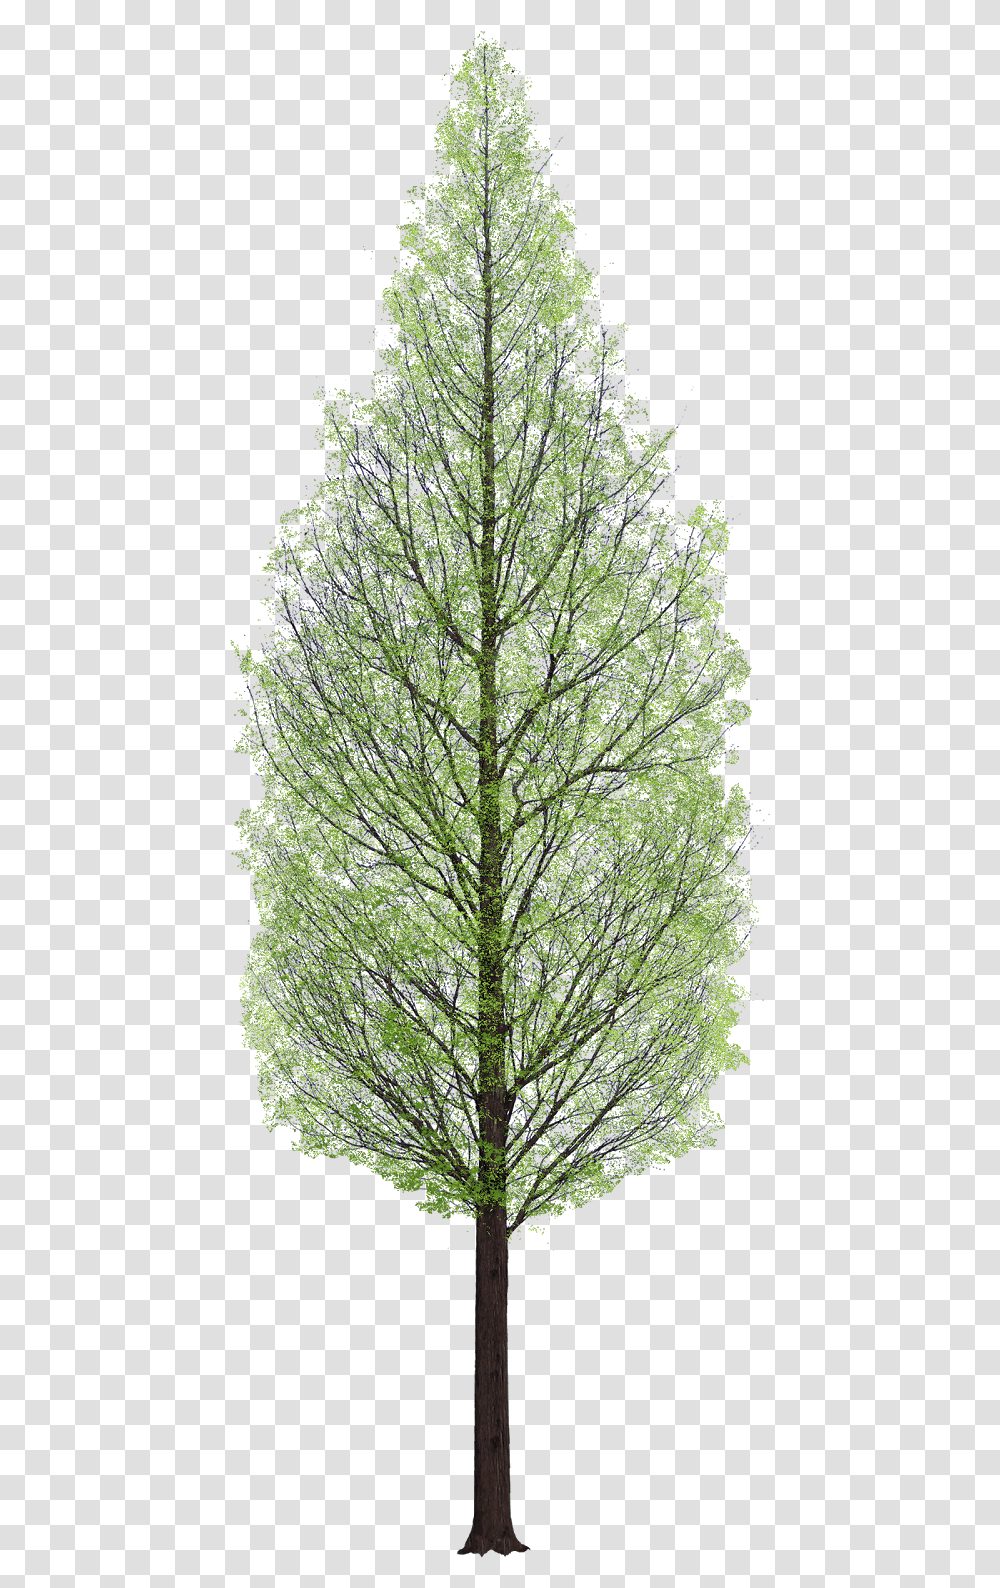 Pine Tree Architecture, Plant, Conifer, Fir, Tree Trunk Transparent Png